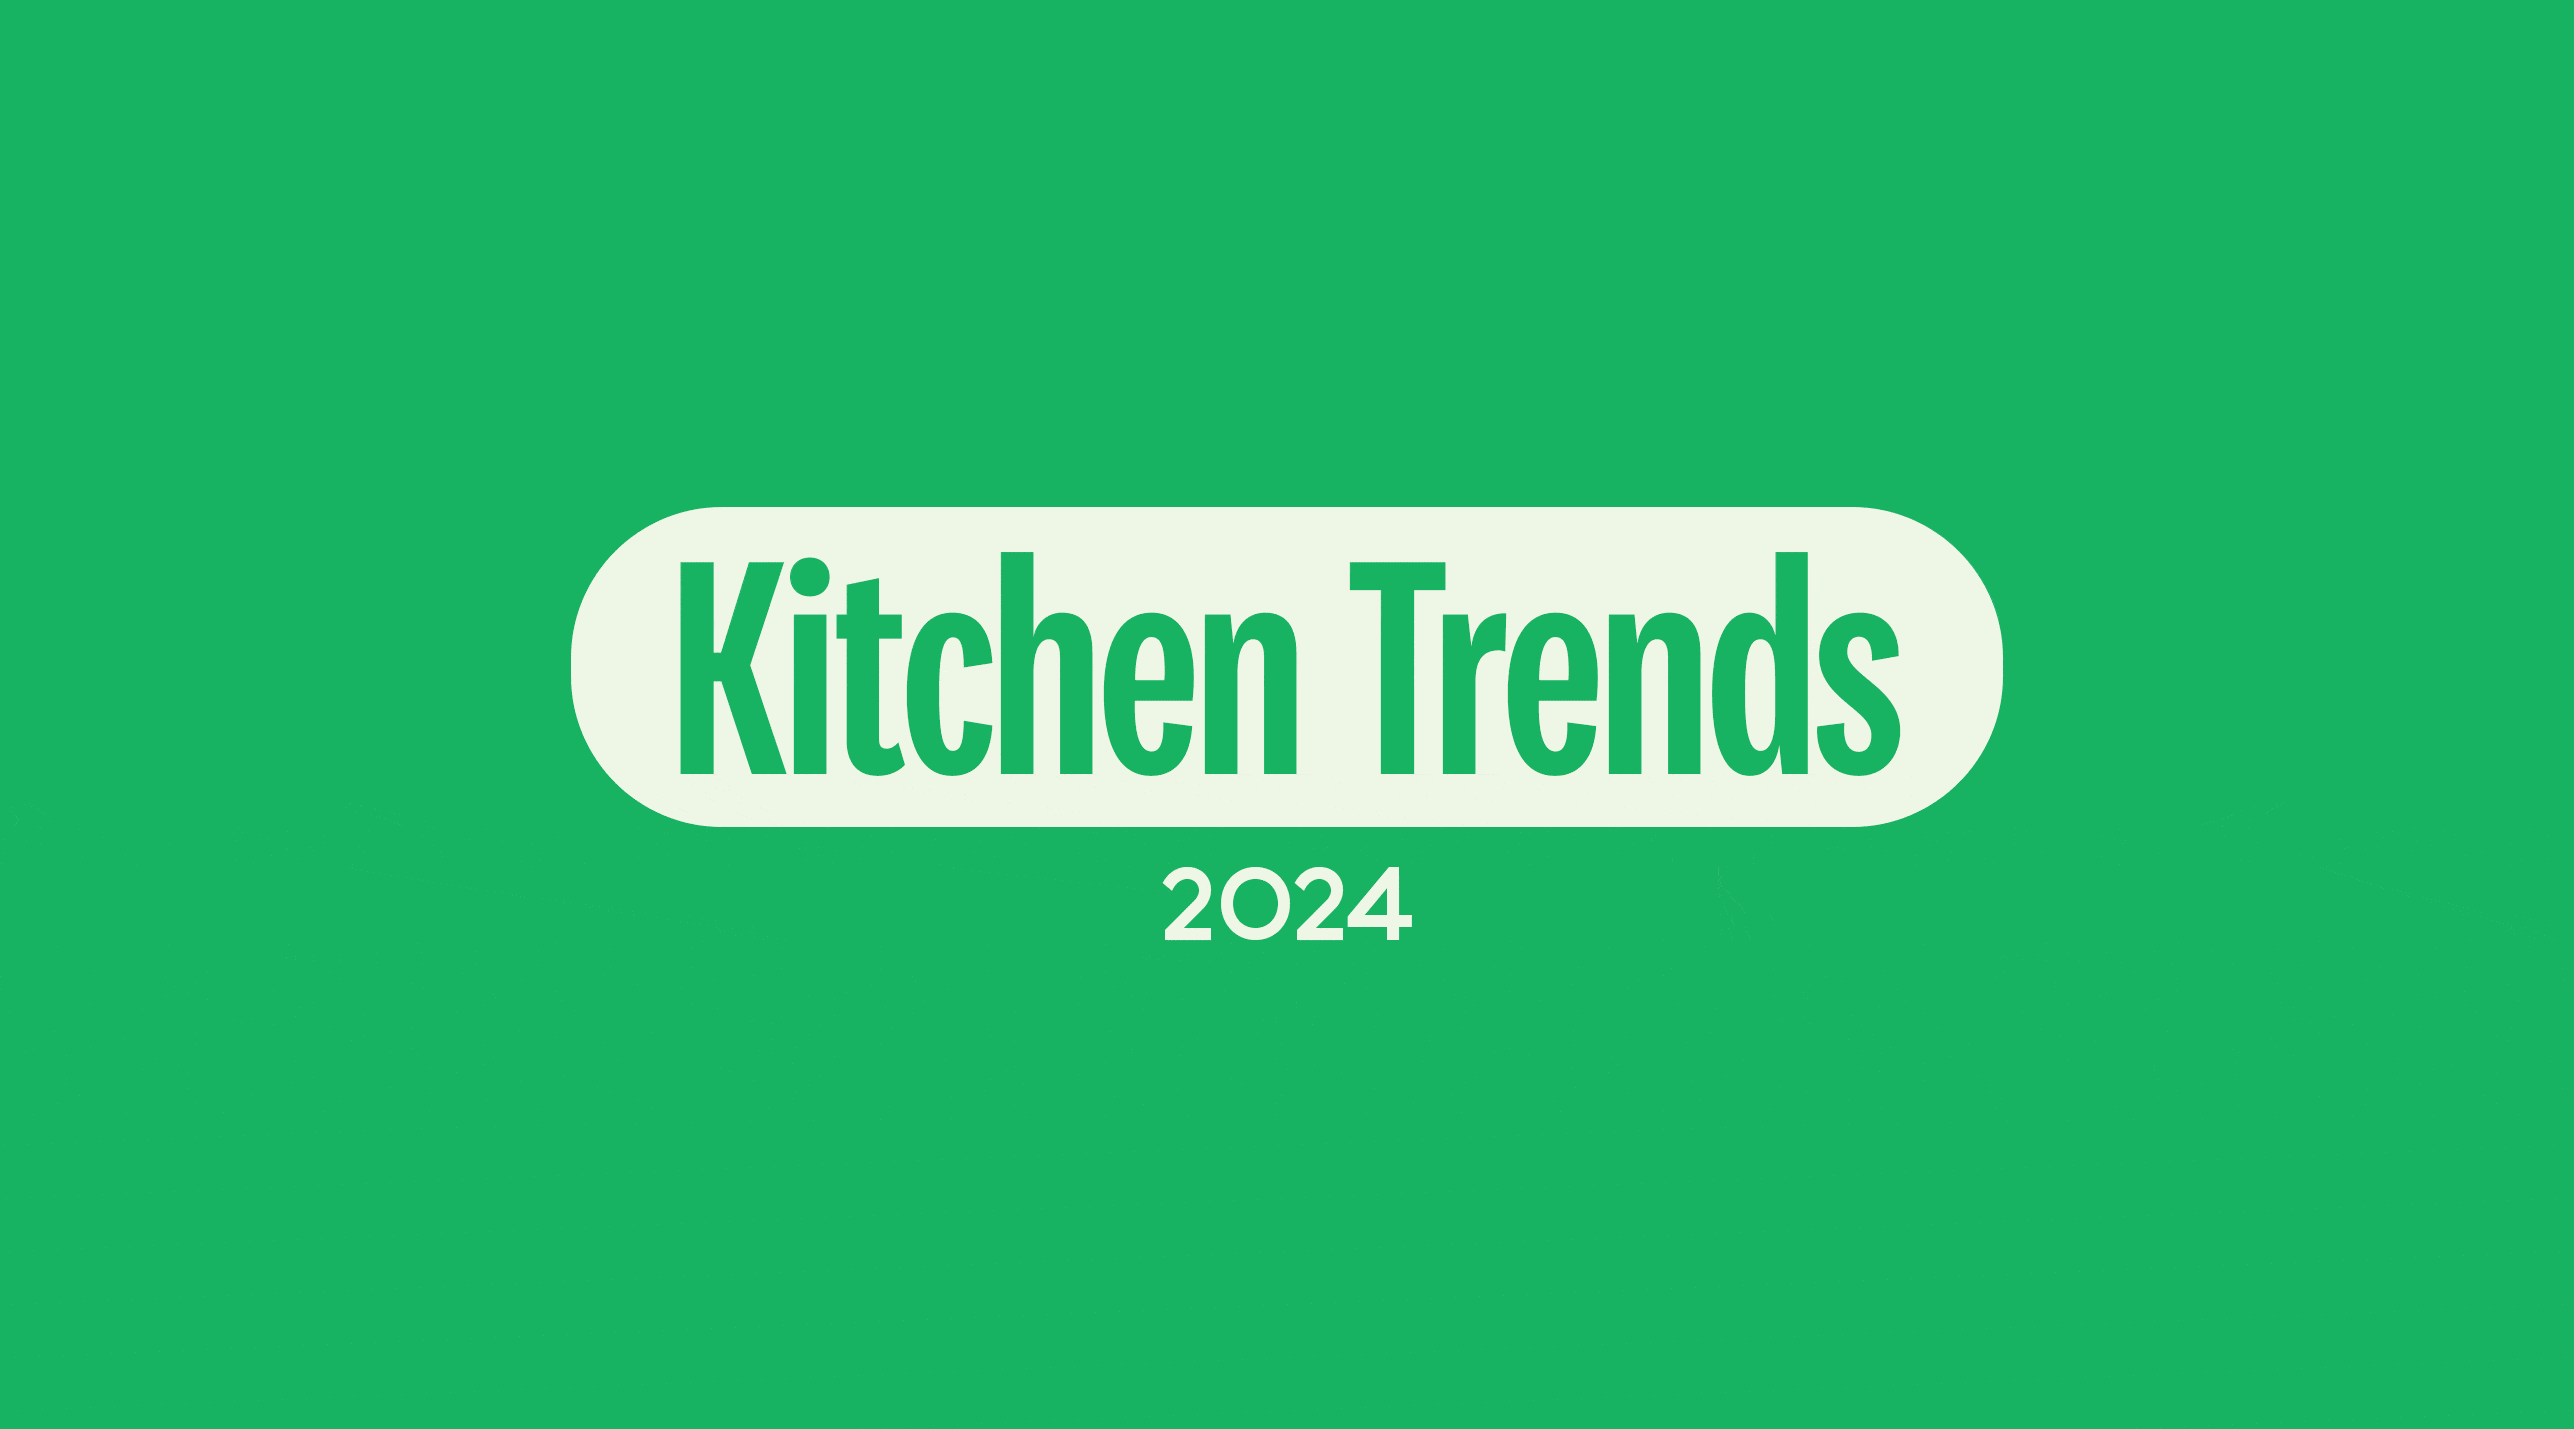 How To Find Trending Products In 2024